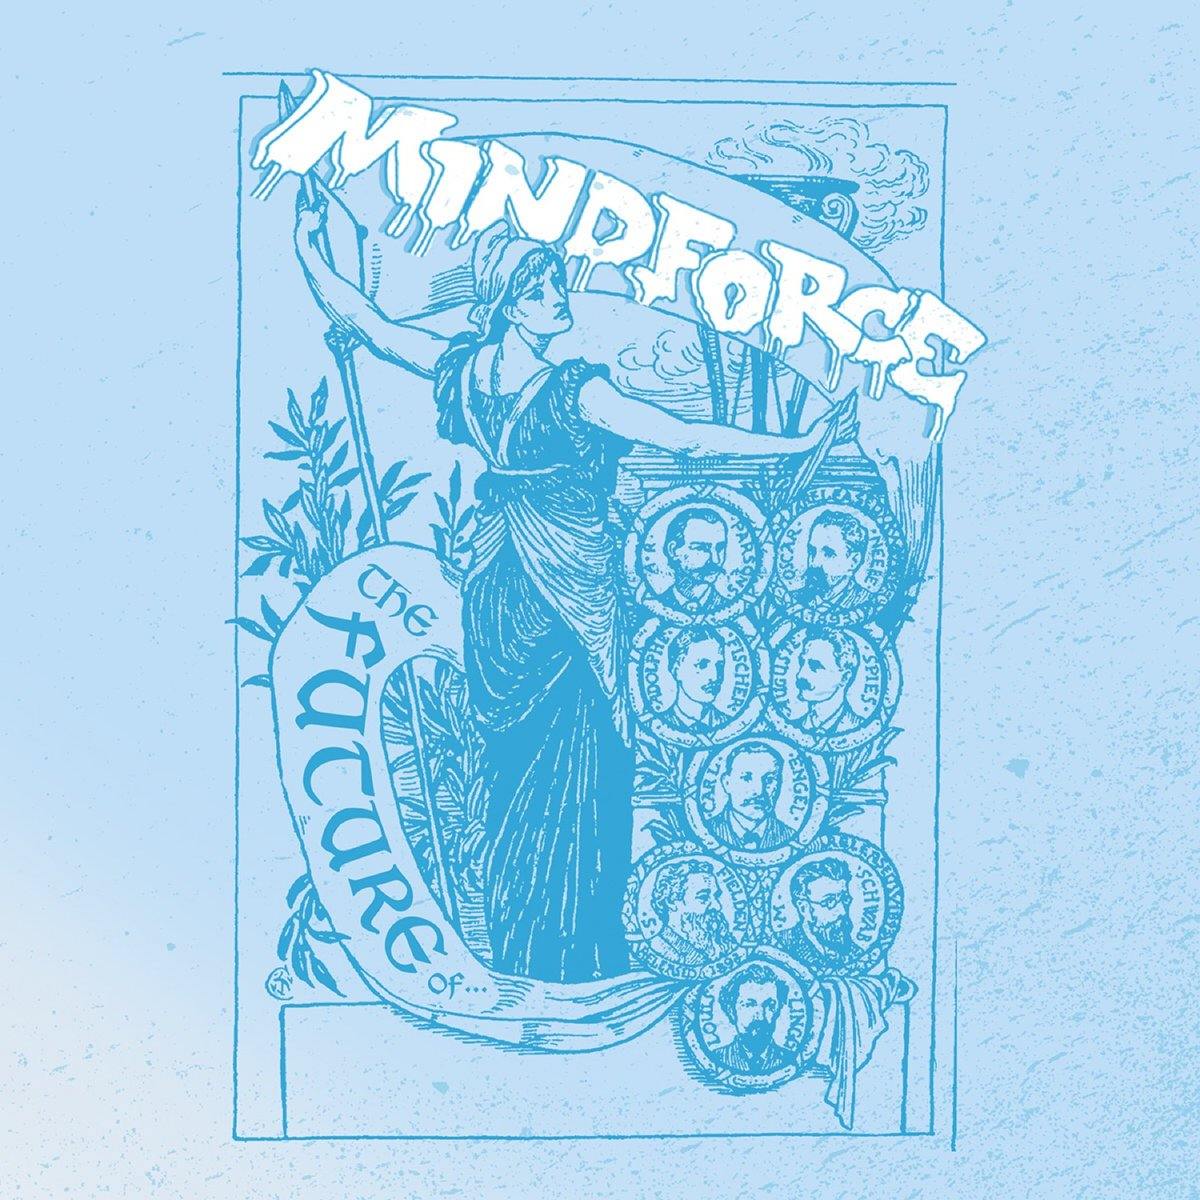 Buy – Mindforce "The Future Of..." 7" – Band & Music Merch – Cold Cuts Merch